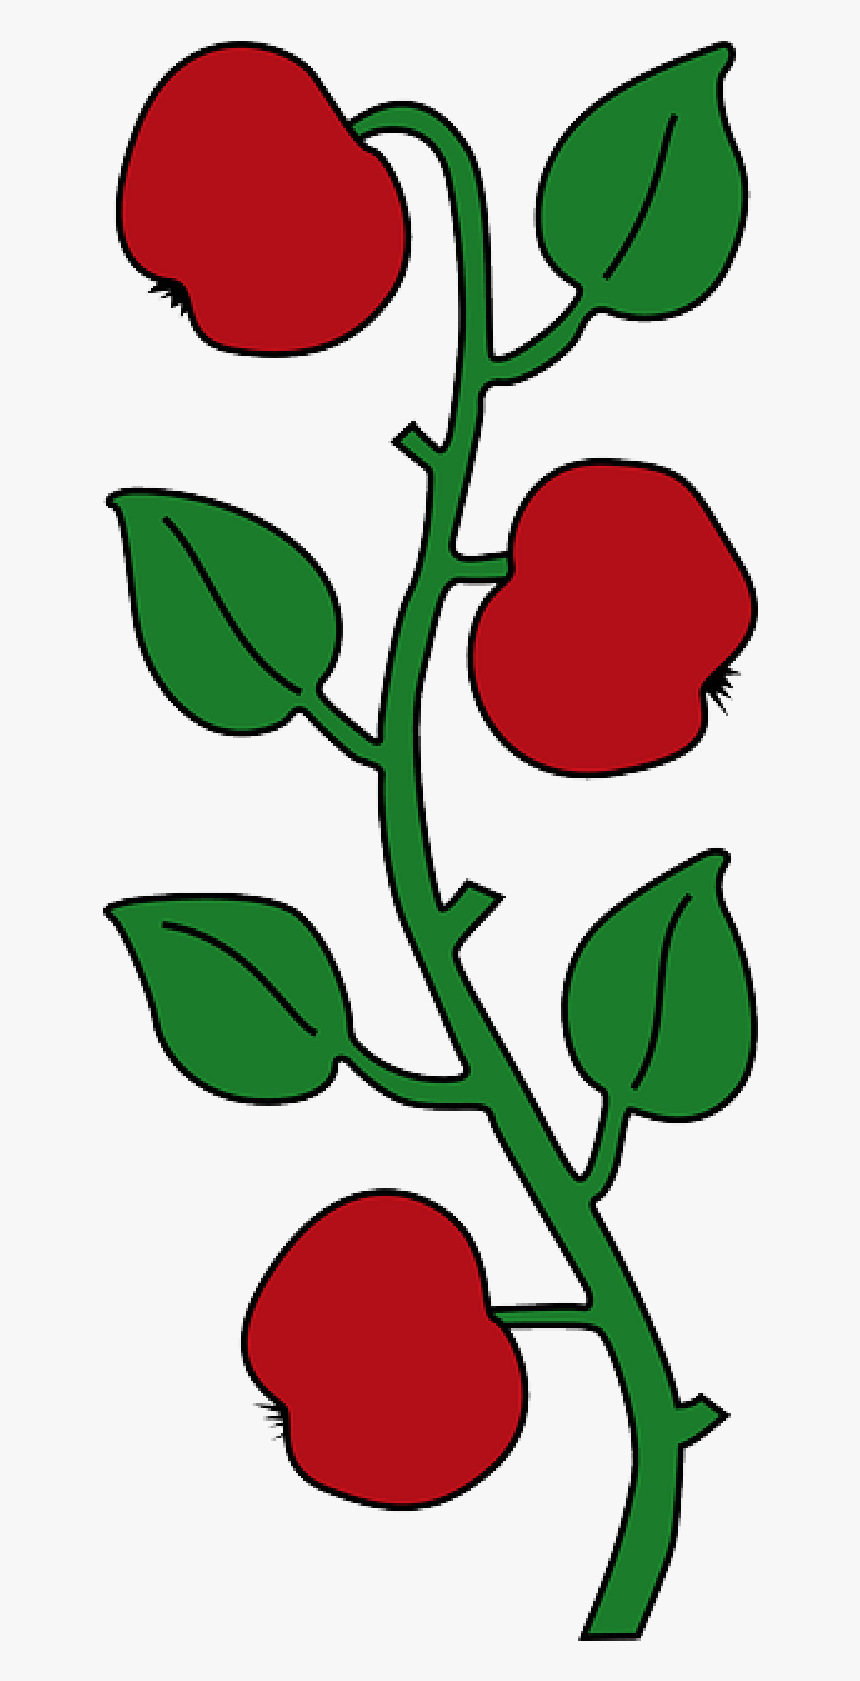 Fruit Tree Cartoon - Apple Tree Branch Clipart, HD Png Download, Free Download